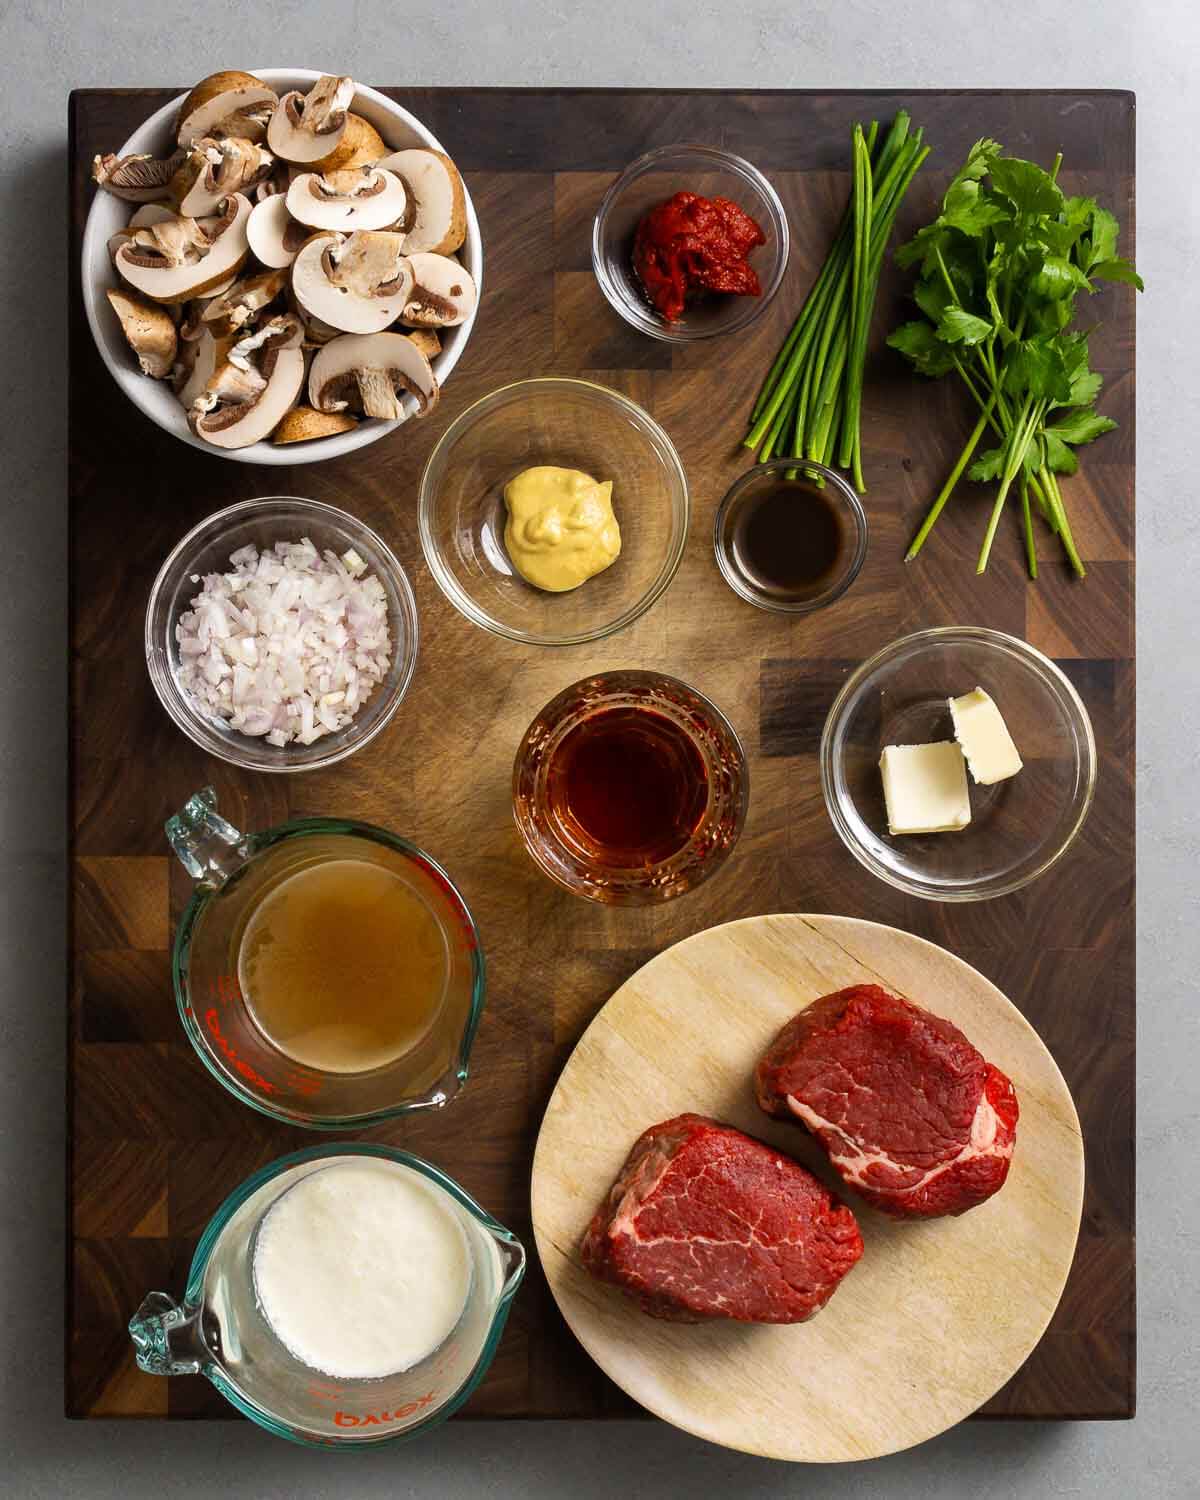 Ingredients shown: mushrooms, tomato paste, chives, parsley, shallot, Dijon mustard, brandy, butter, Worcestershire sauce, beef stock, cream, and beef tenderloin.